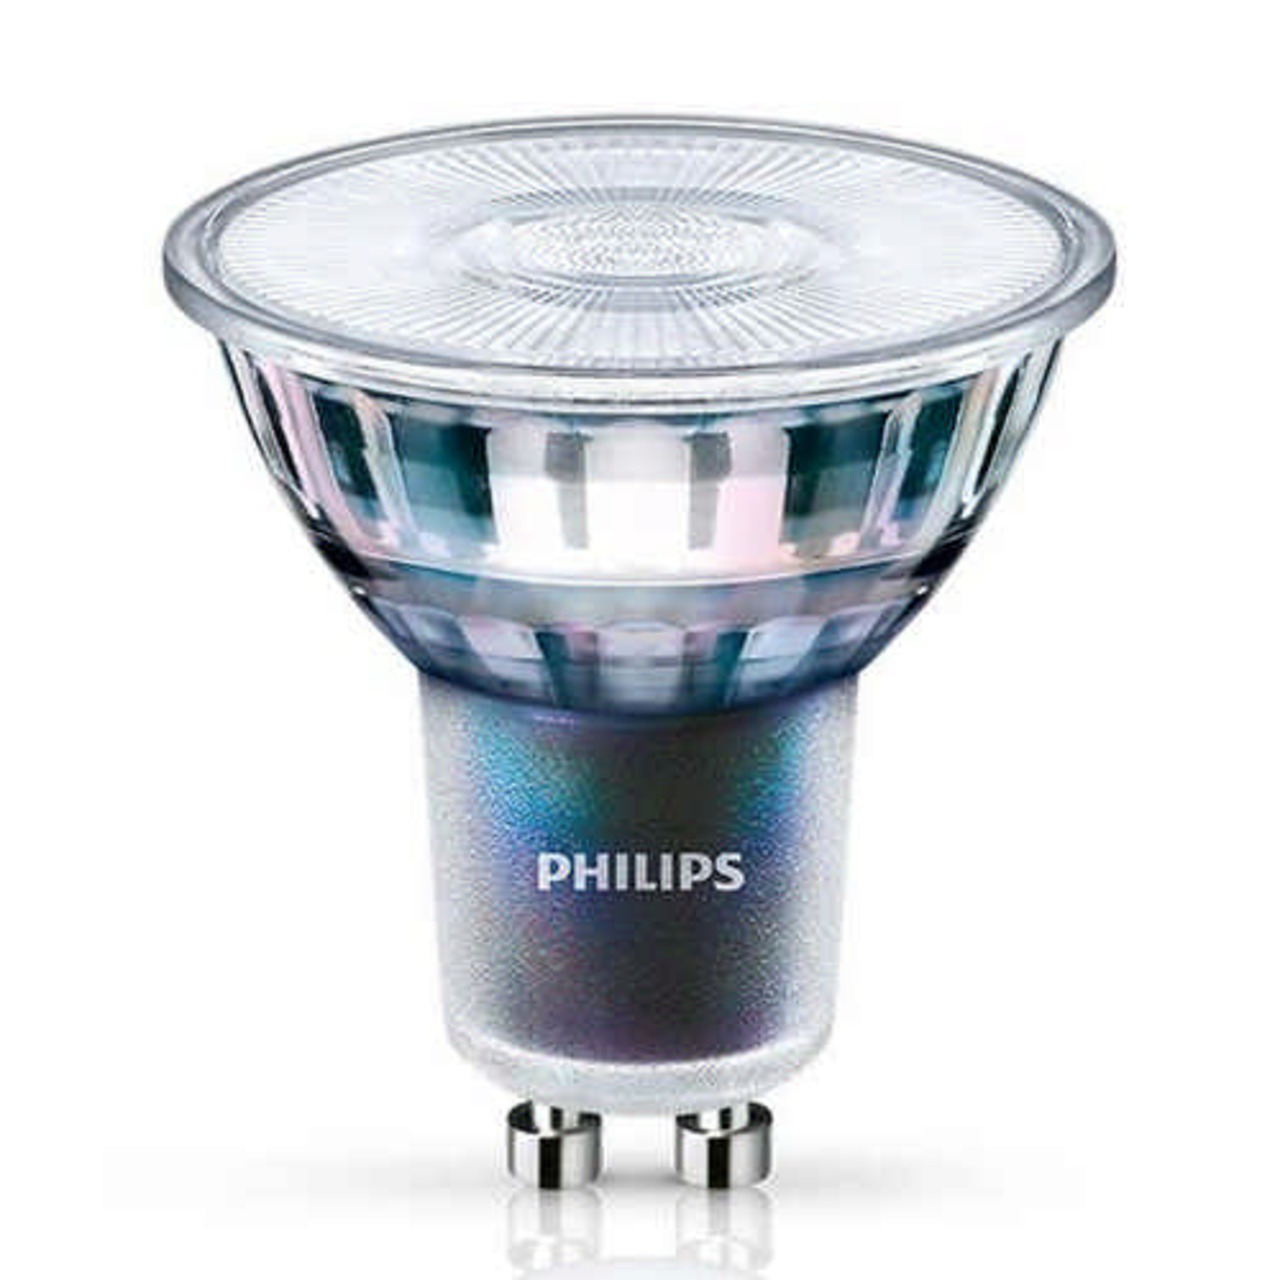 Philips MASTER ExpertColor 3-9-W-GU10-LED-Lampe- 300 lm- 97 Ra- 36- 4000K- neutralweiss- dimmbar